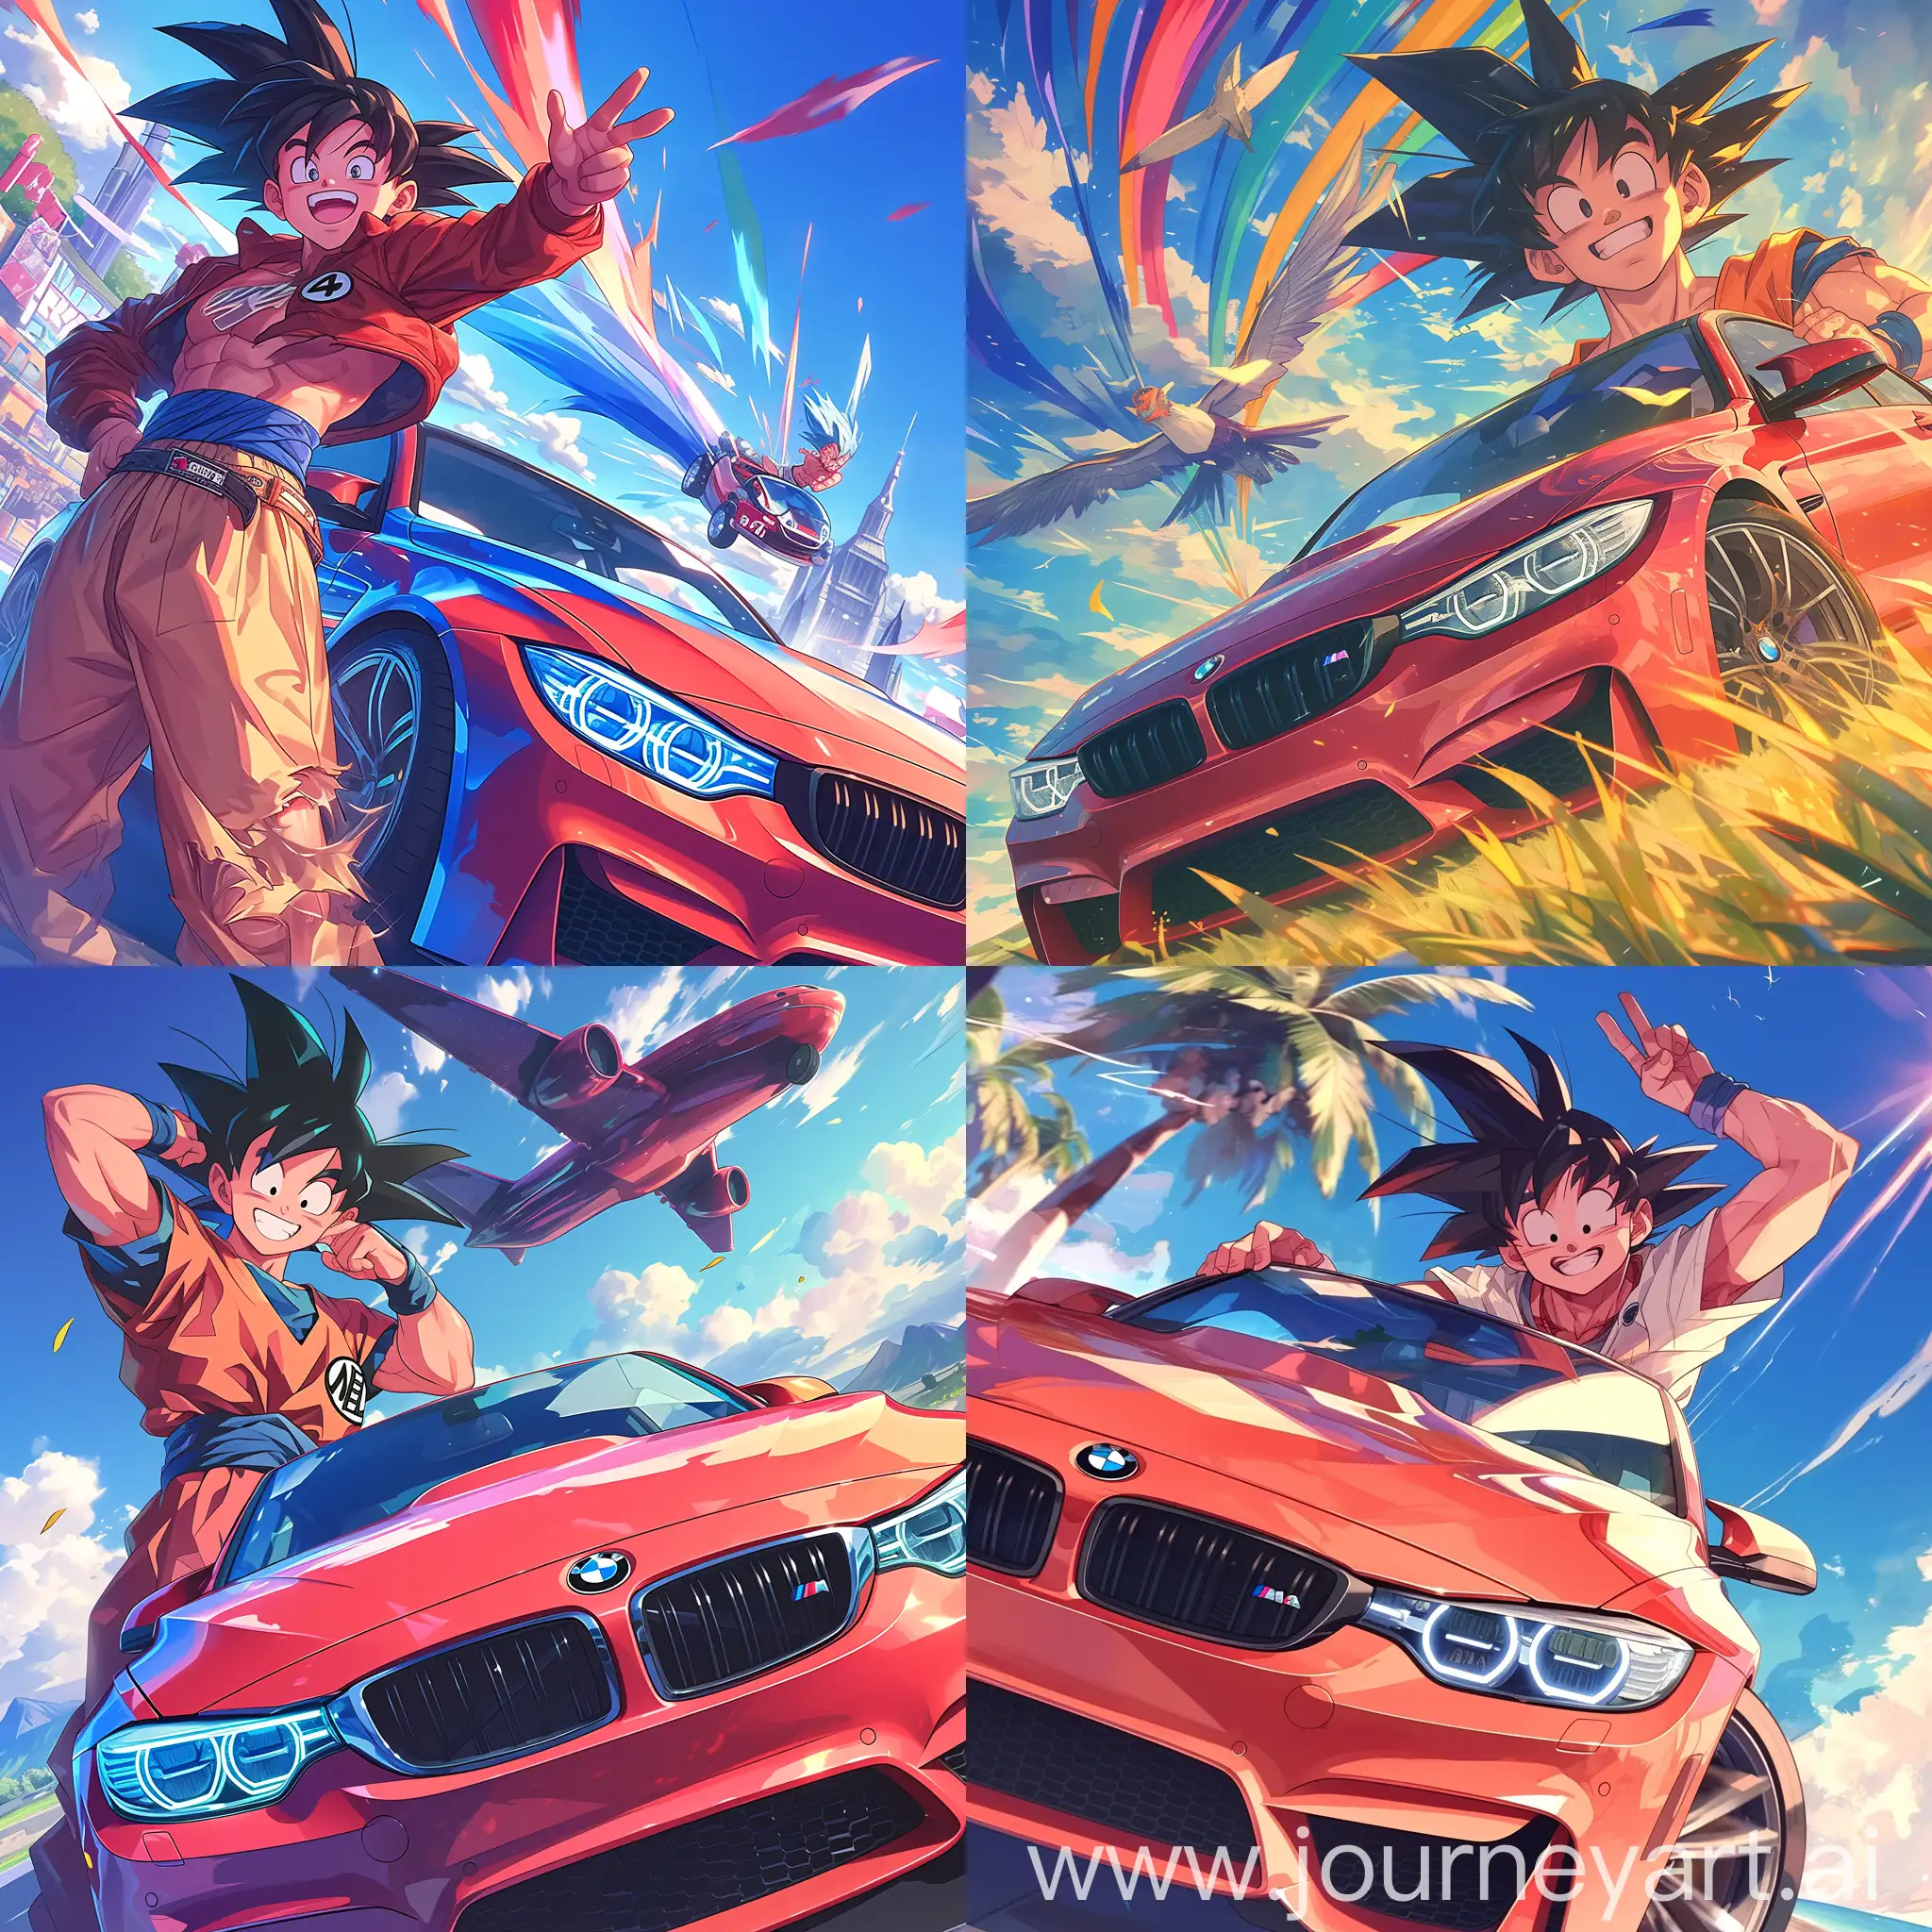 !mj1 Dragon Ball's Goku posing cheerfully next to a sleek BMW M4, vibrant colors, anime style, dynamic angle, energy aura visible, clear sunny day, Dragon Ball Z era, epic and playful atmosphere, high-resolution, detailed artwork by Akira Toriyama --ar 1:1 --s 750 --niji 6